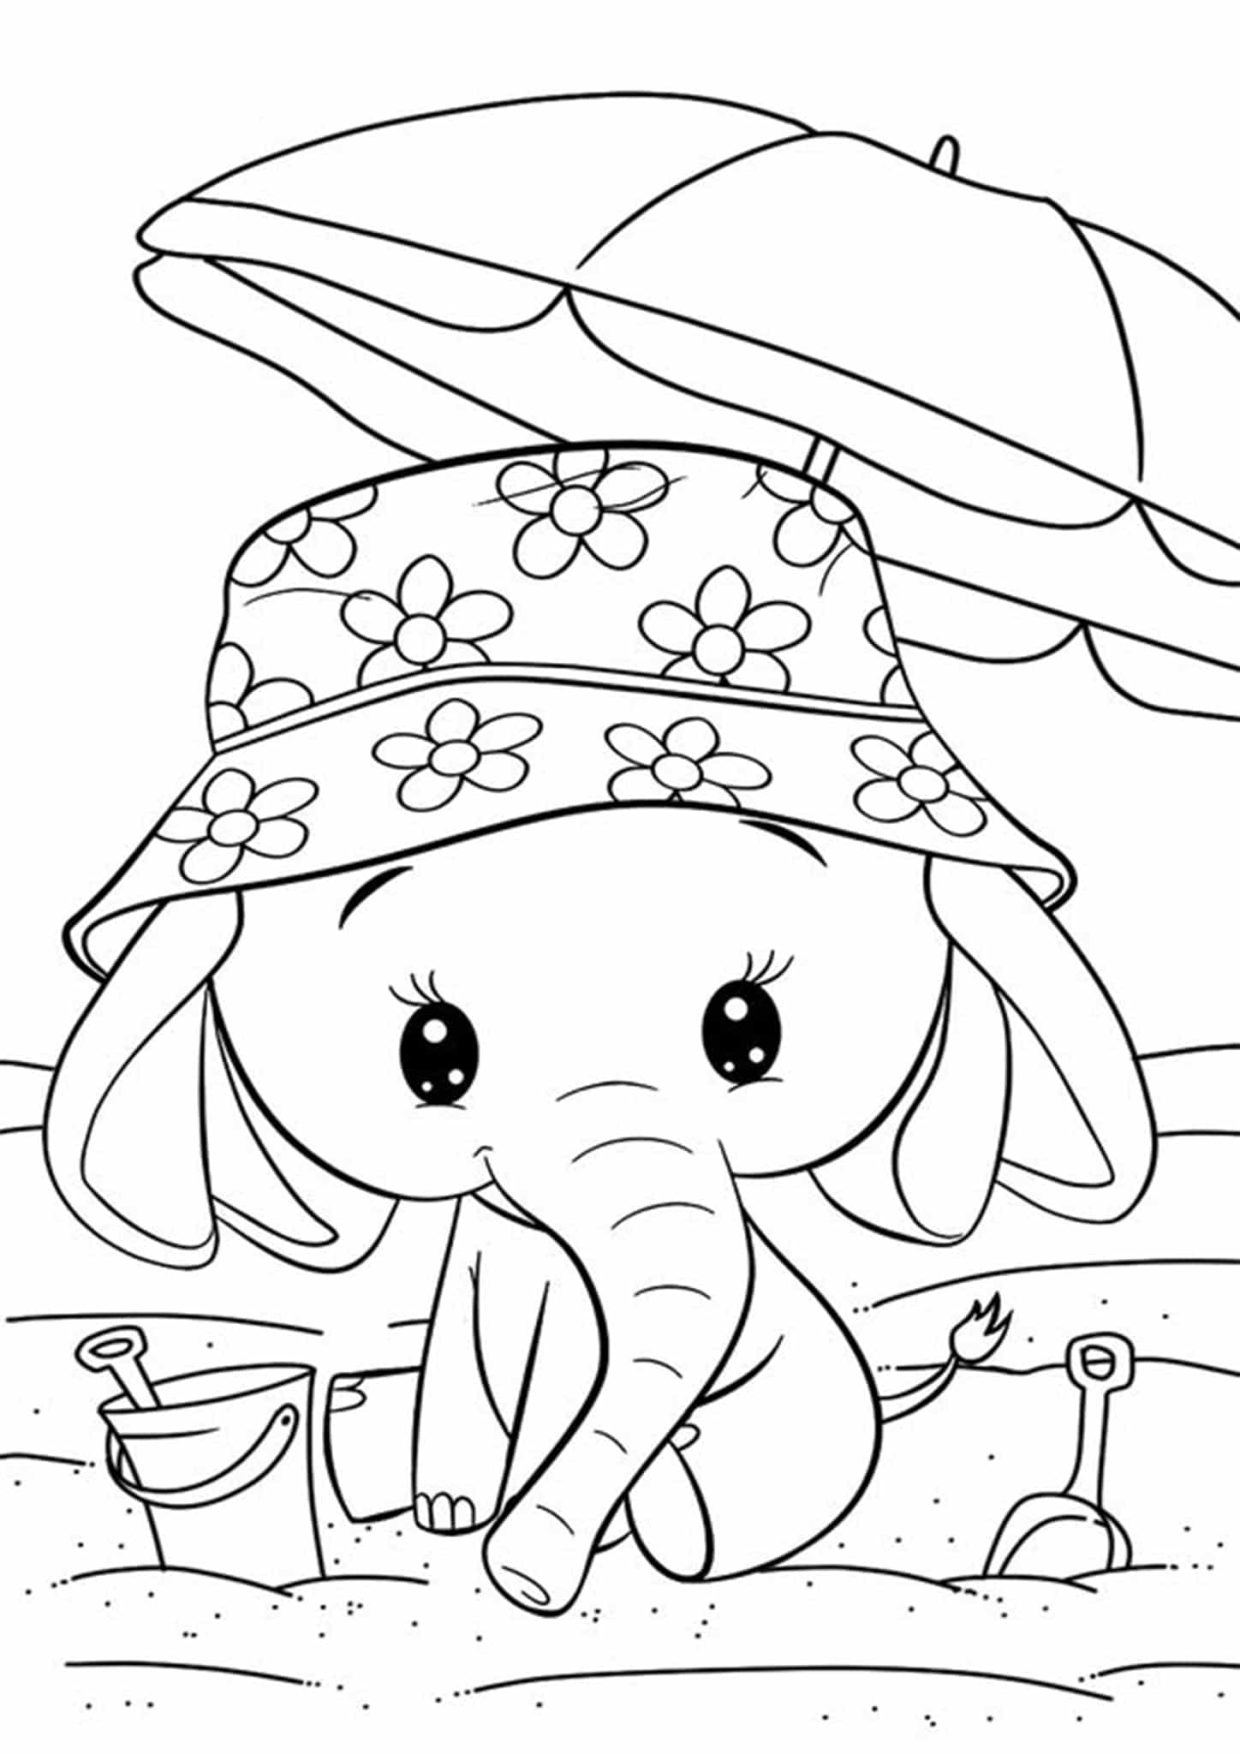 Cute Elephant Coloring Pages 2